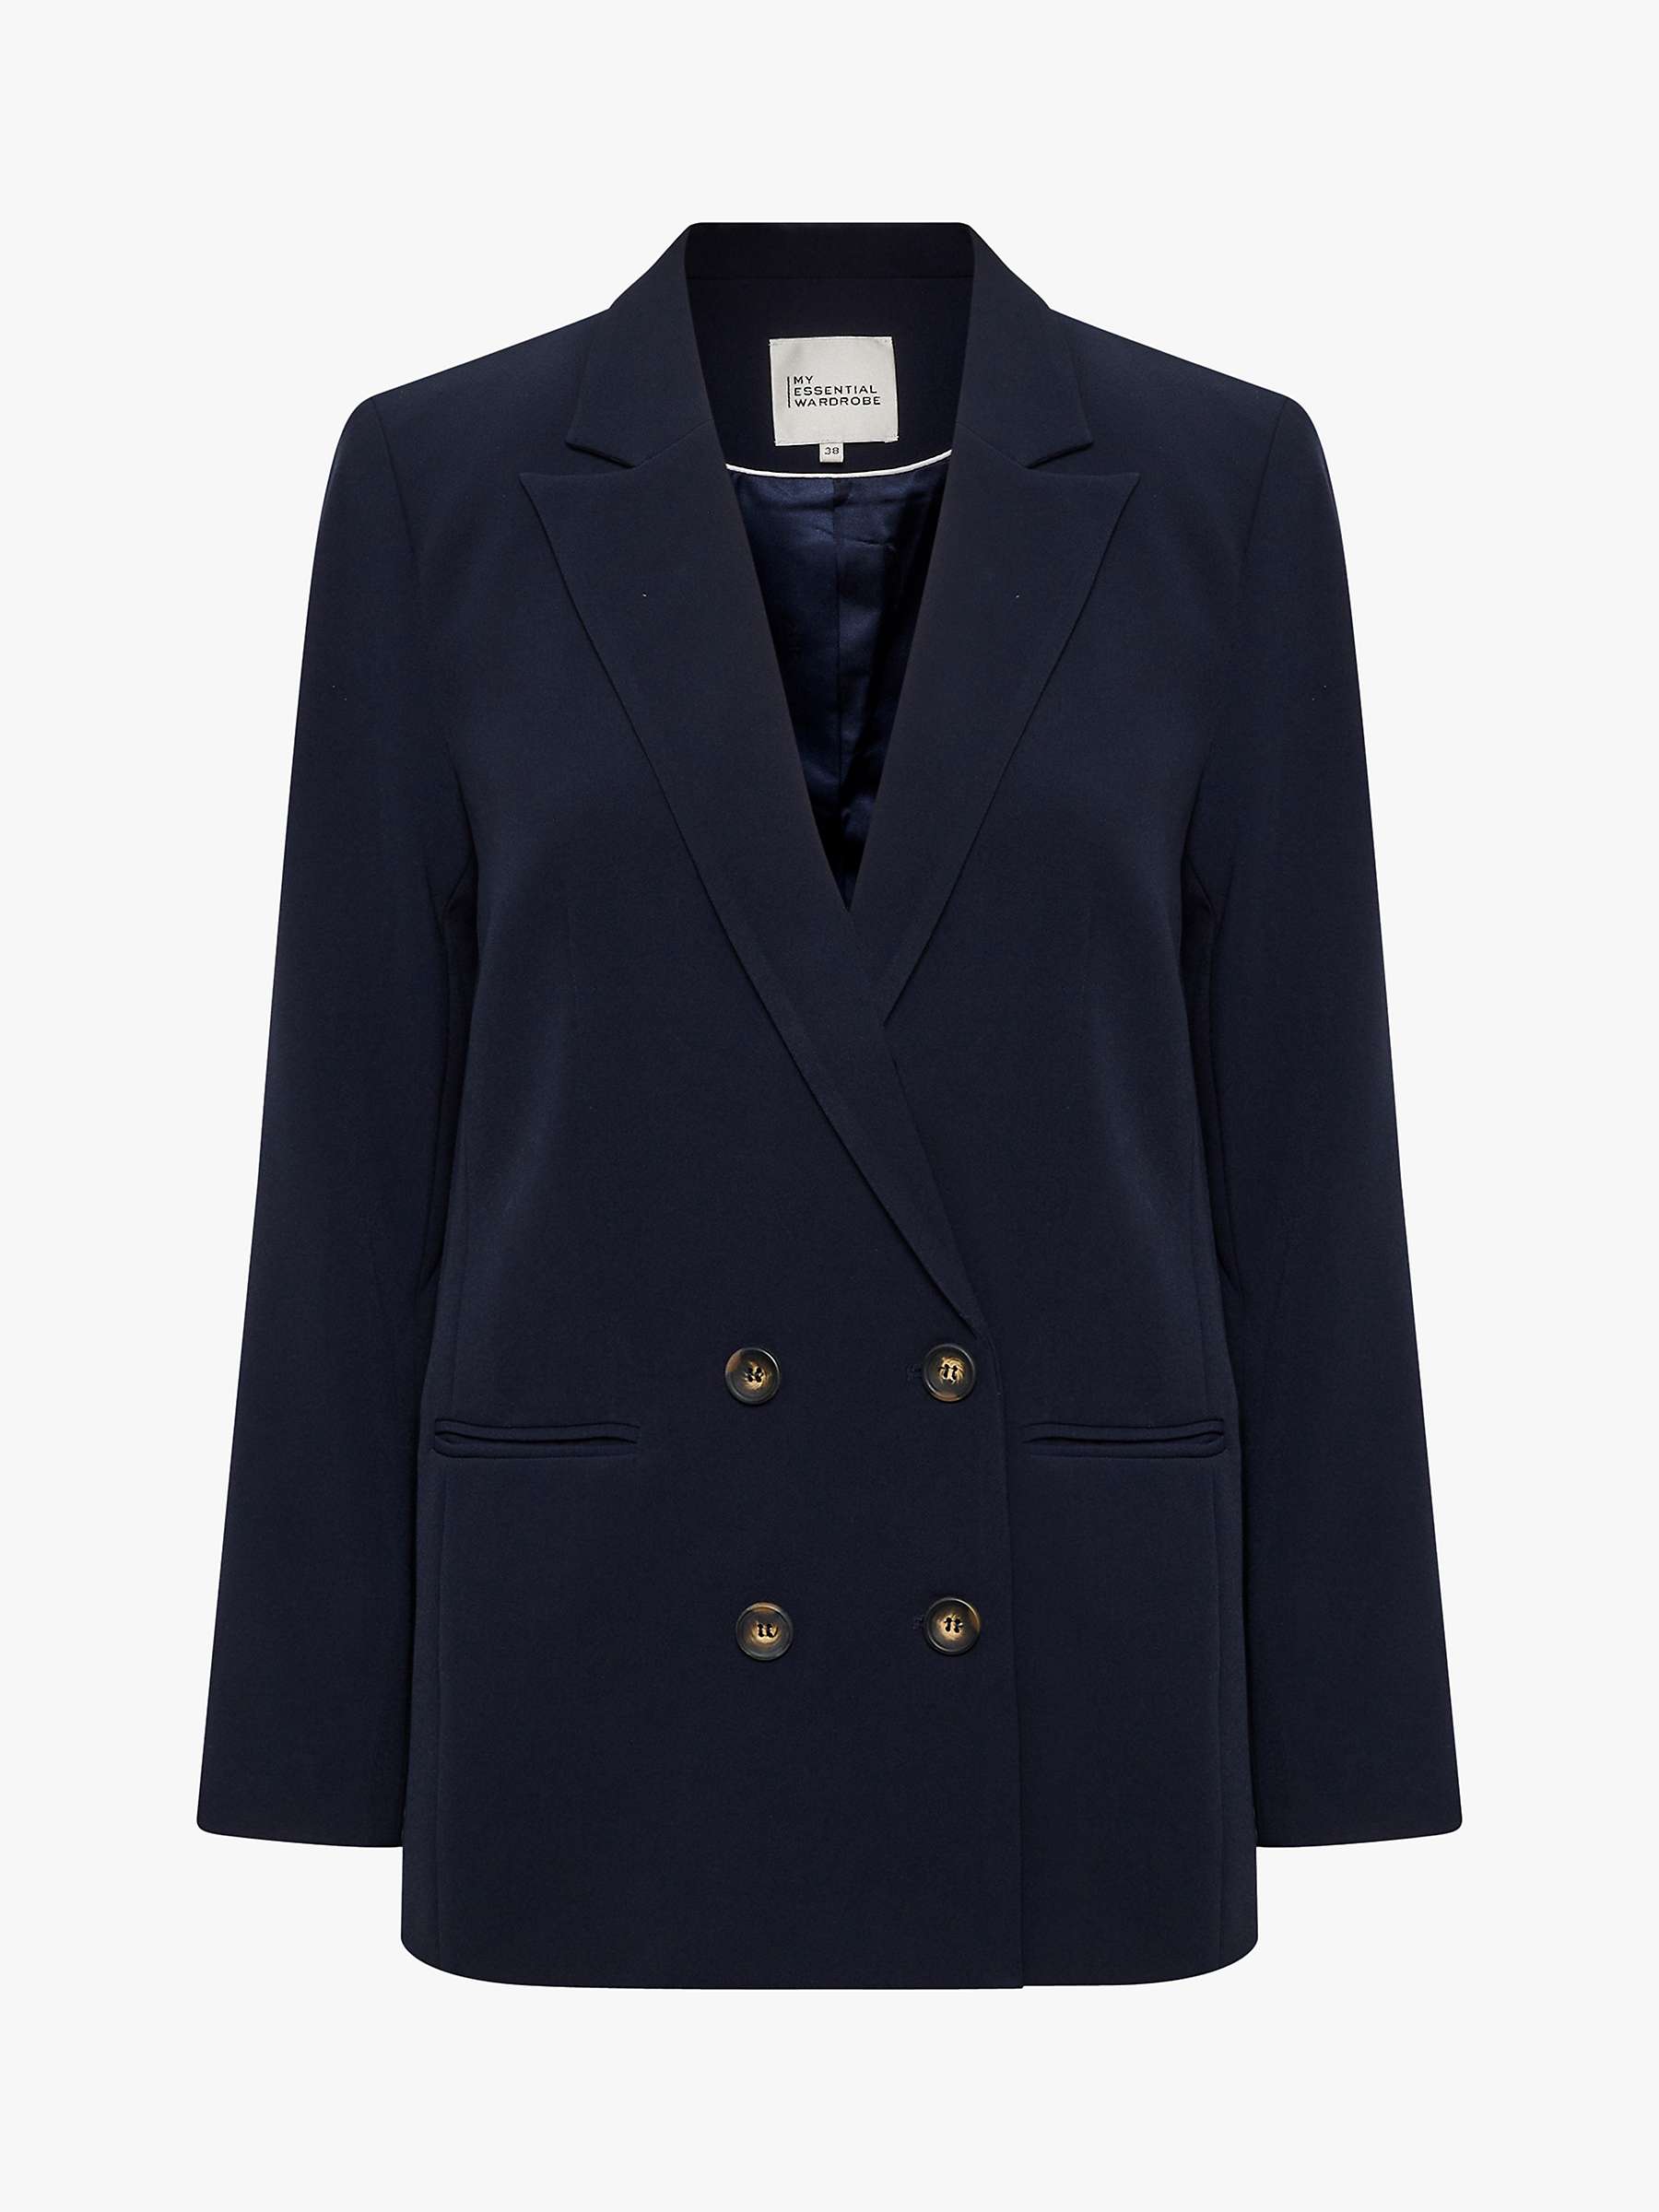 Buy MY ESSENTIAL WARDROBE Tailored Double Breasted Blazer, Baritone Blue Online at johnlewis.com